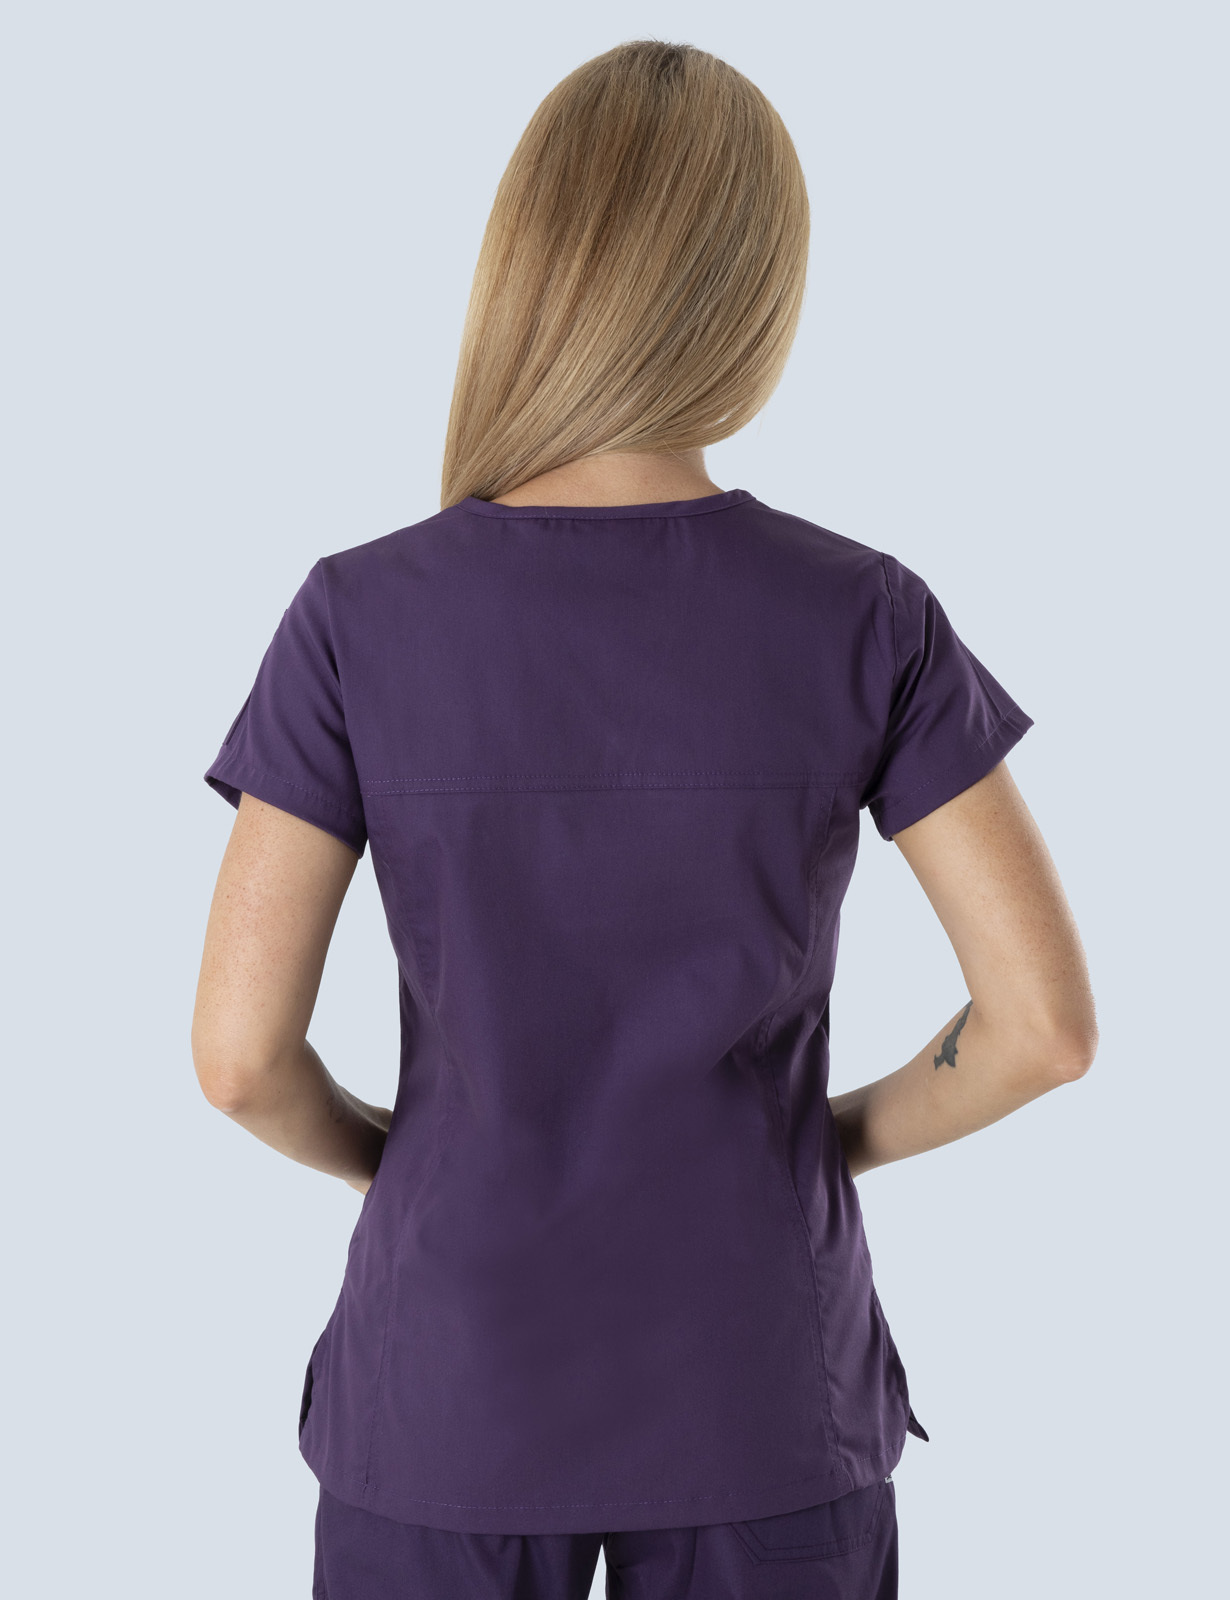 Women's Fit Solid Scrub Top - Aubergine - Large - 0